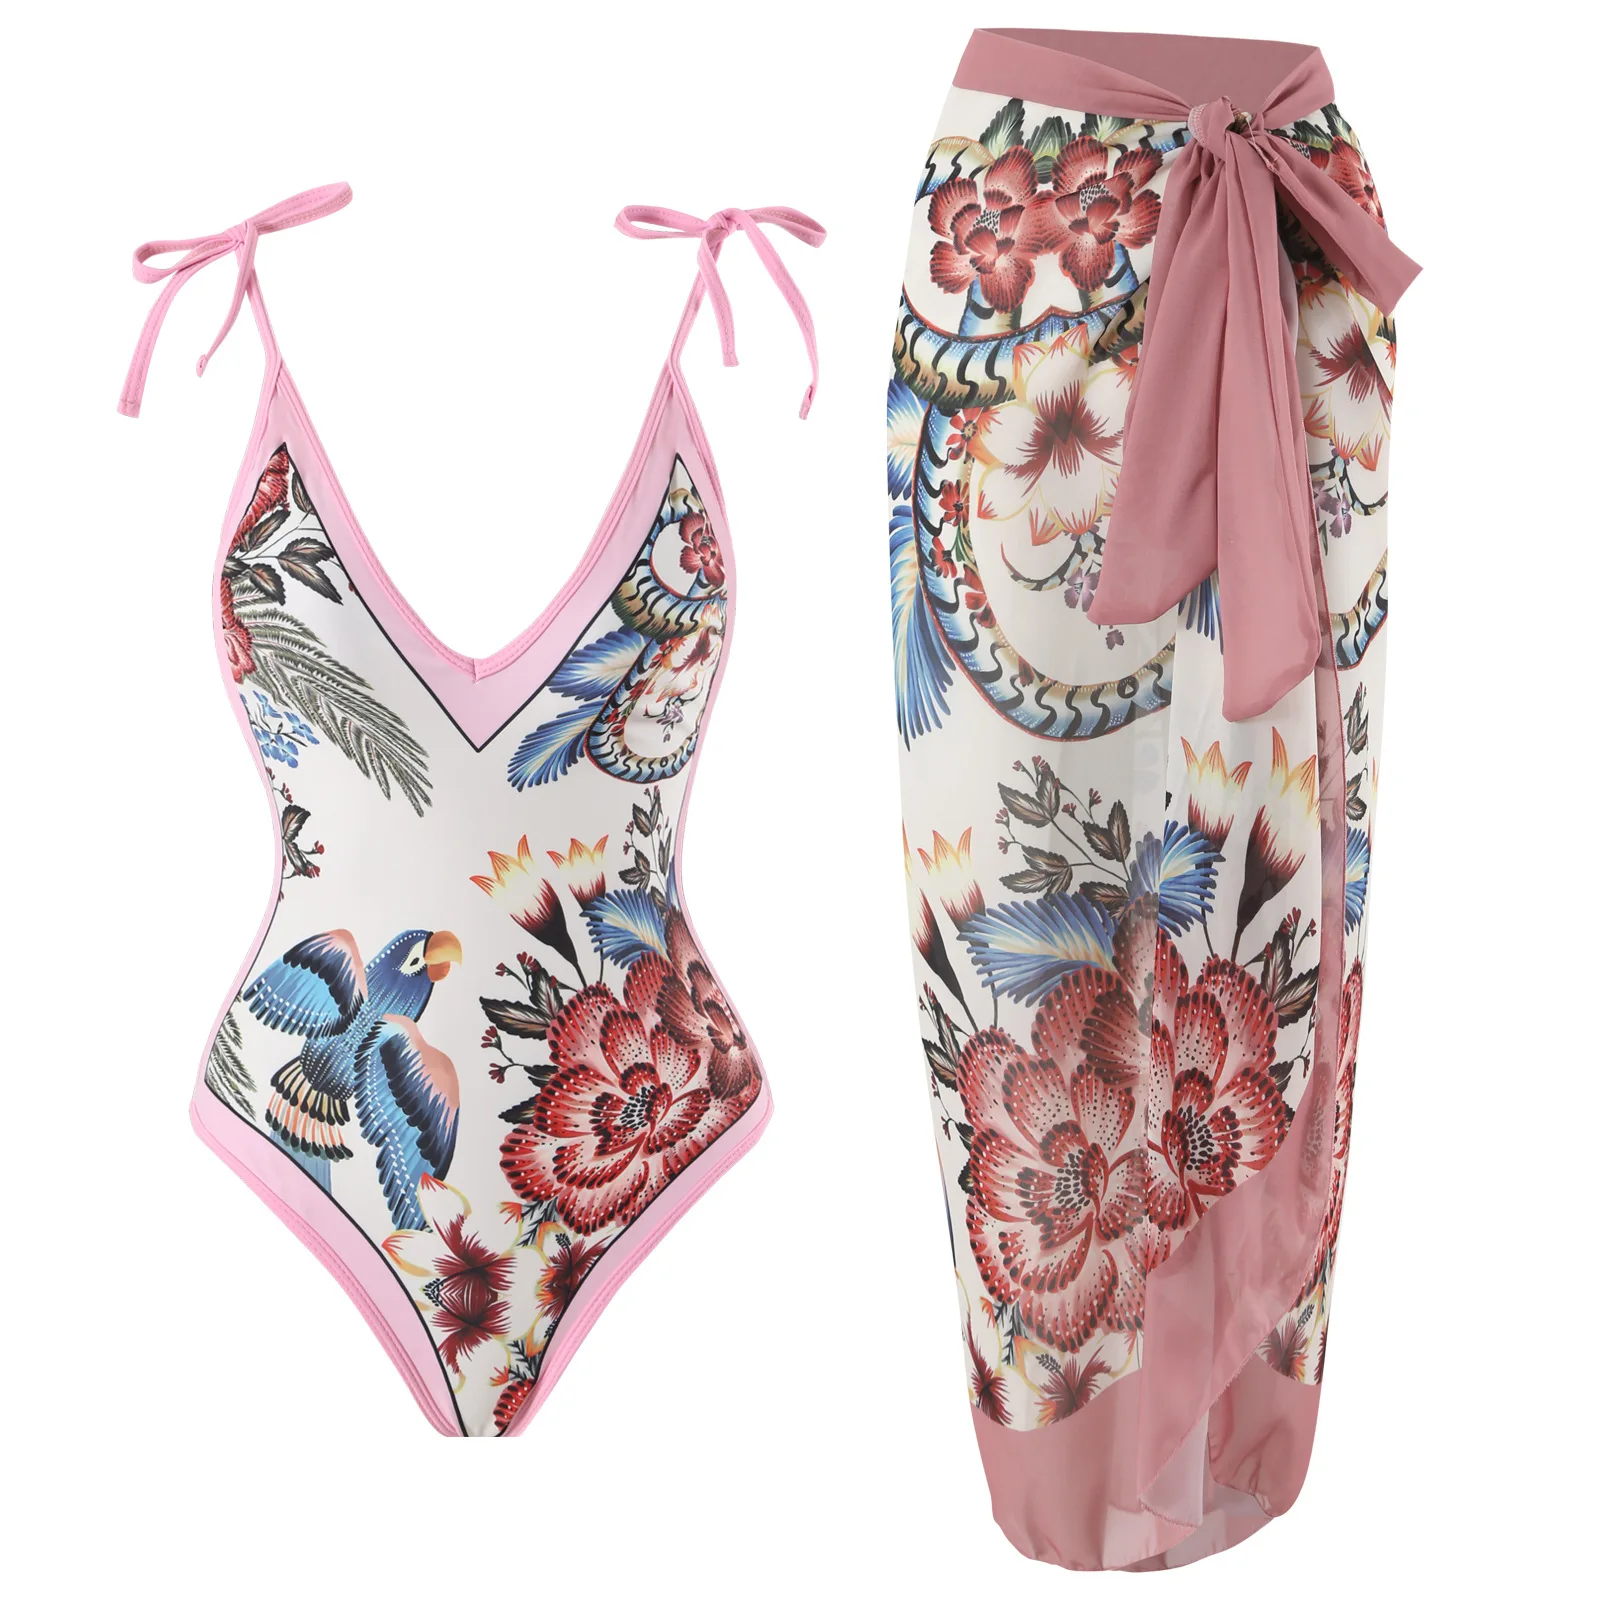 

Women Swimsuits with Deep V-Neckline, Fine Strap Shoulders and Parrot Print Tied with Ribbon, Paired with a Cover-Up